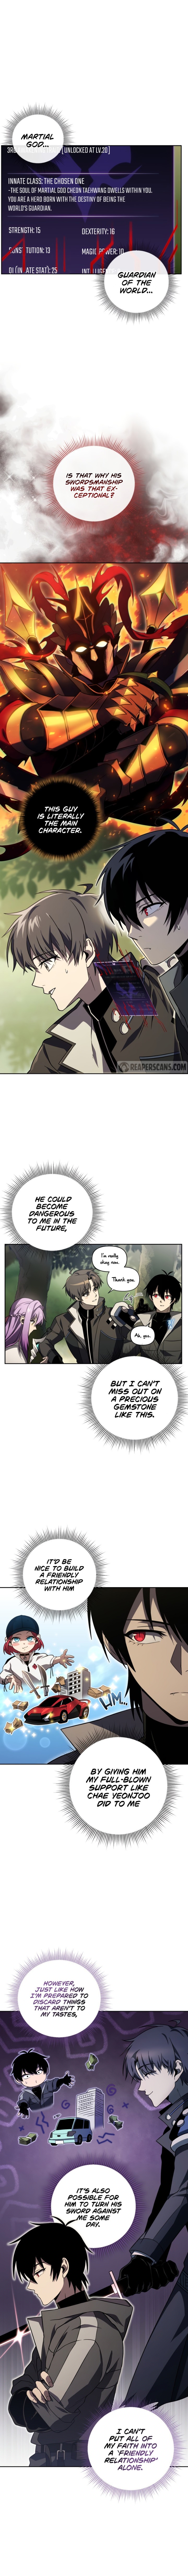 Player Who Returned 10,000 Years Later - Chapter 36 Page 2